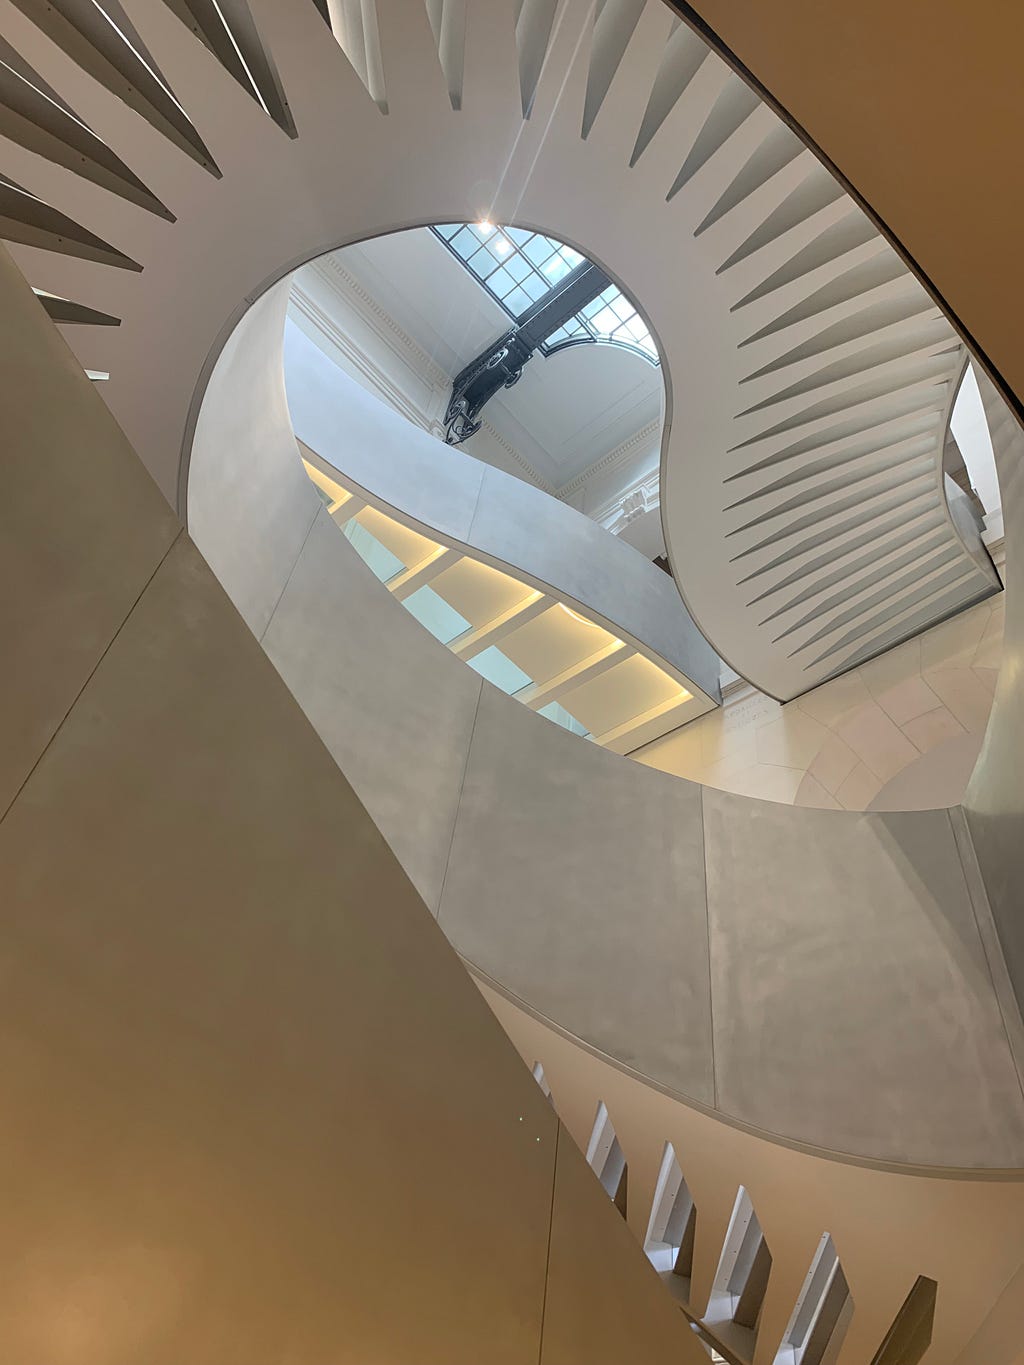 Low-angle view of a modern spiral staircase inside the BNF Richelieu. White steps emerge from a hollow center, surrounded by beige walls and cut-out balustrades. Above, a vaulted ceiling with windows lets in natural light.